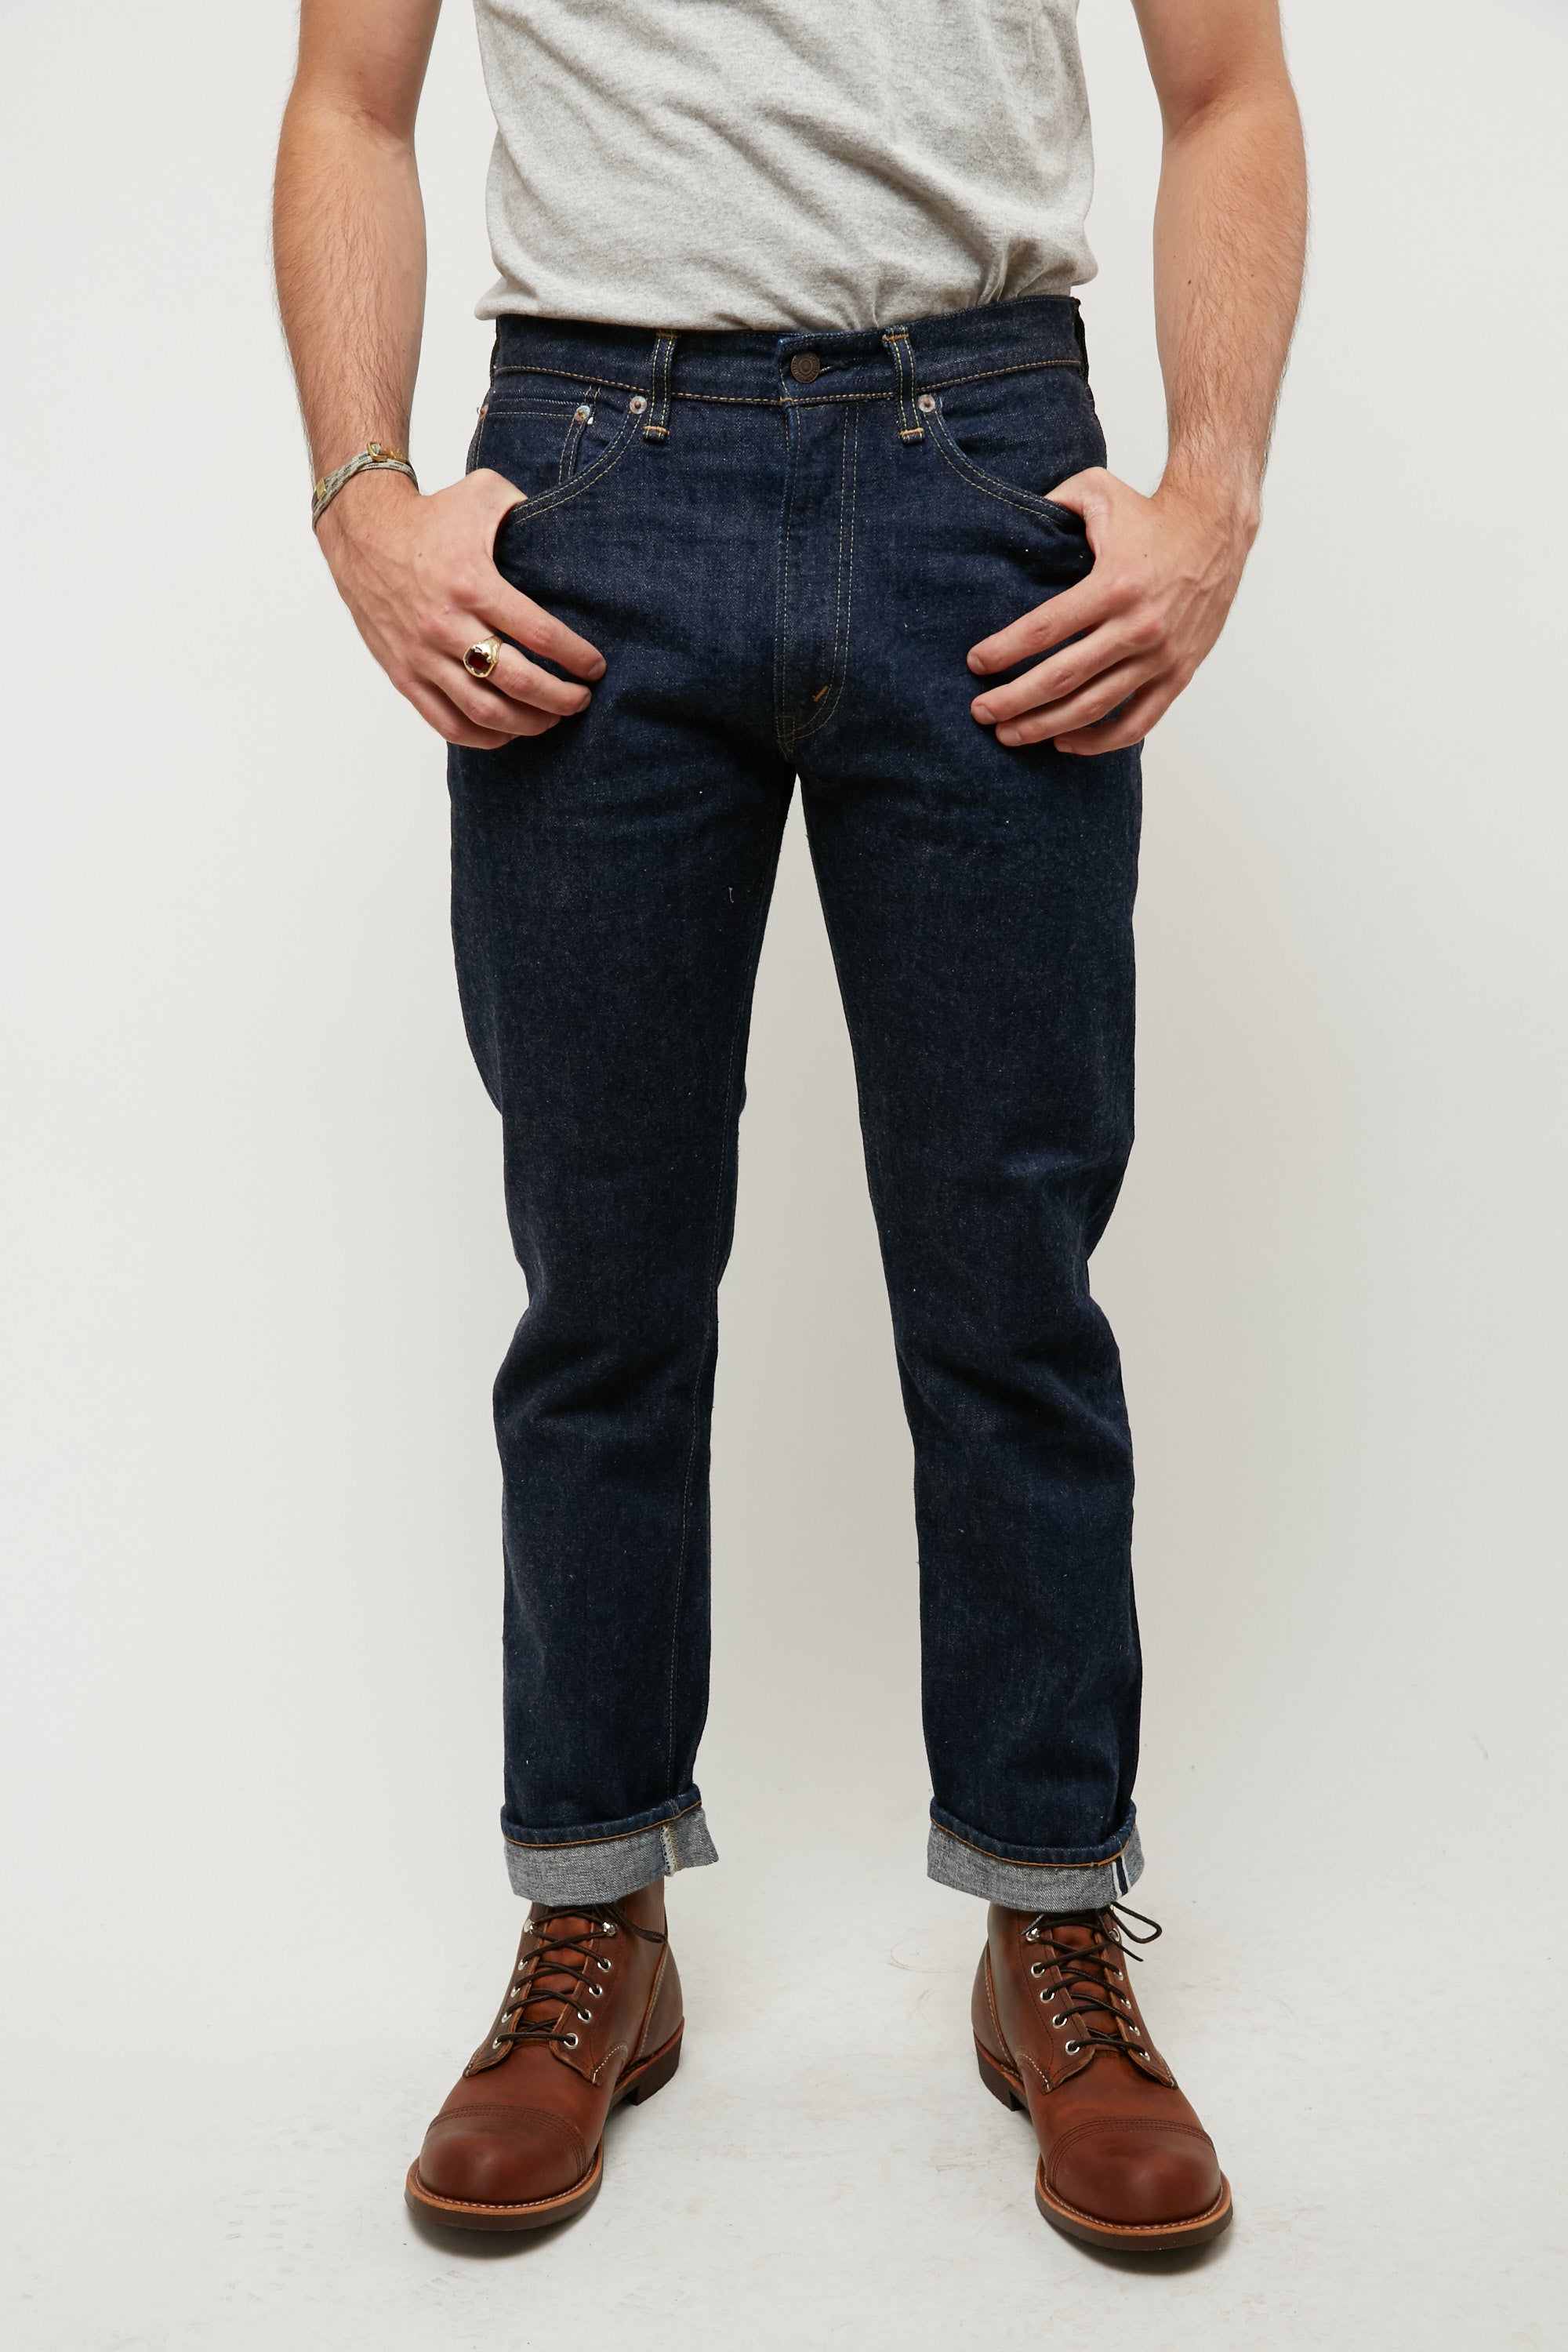 orSlow 107 Ivy League Slim Jean - One Wash – Totem Brand Co.